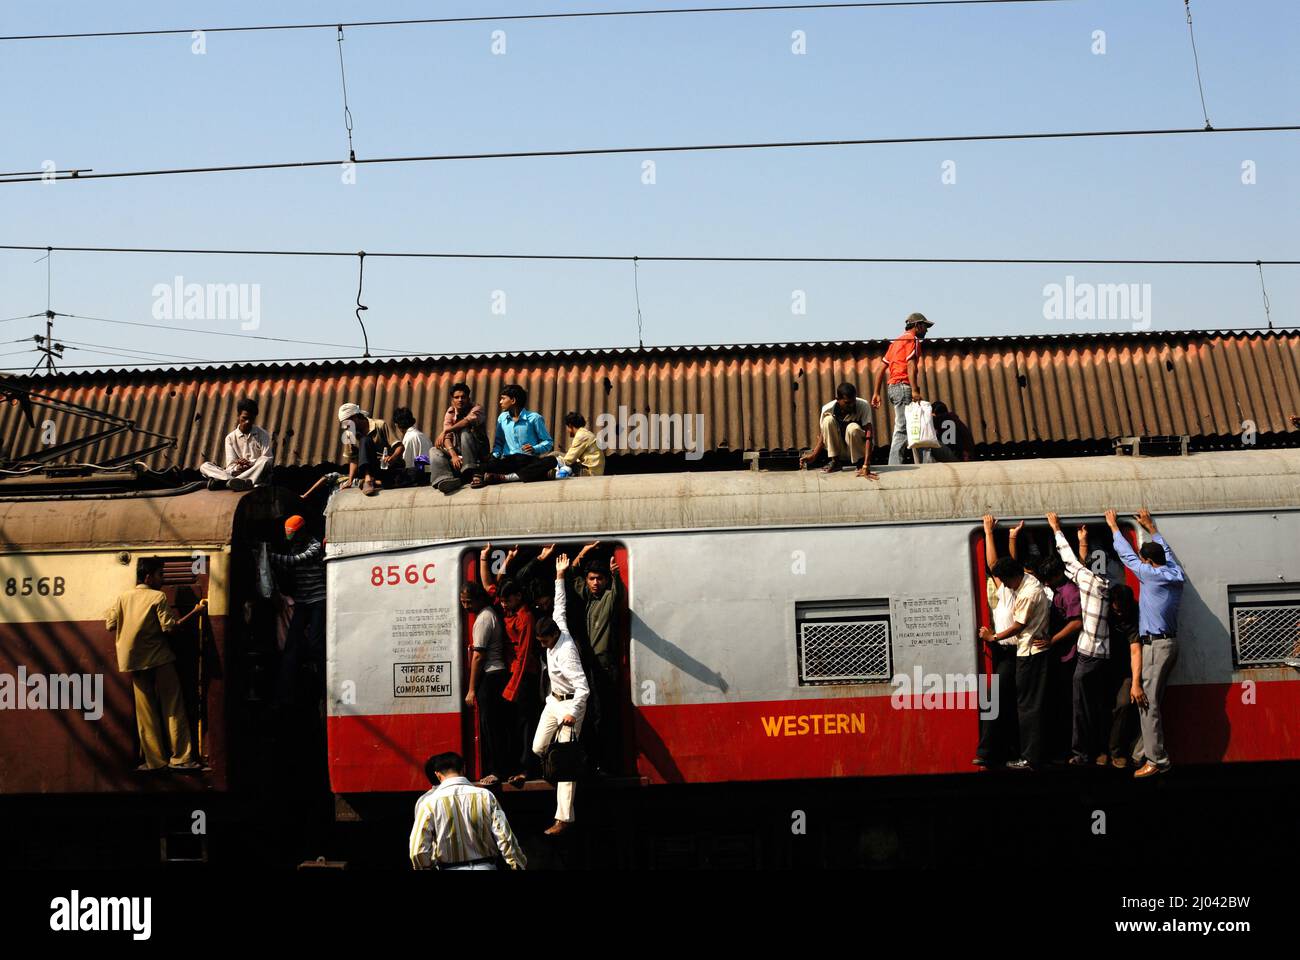 Indian commuters travel on the roof of a train performing stunts on local trains; 6 billion commuter travel in local trains of western suburb Mumbai. Stock Photo